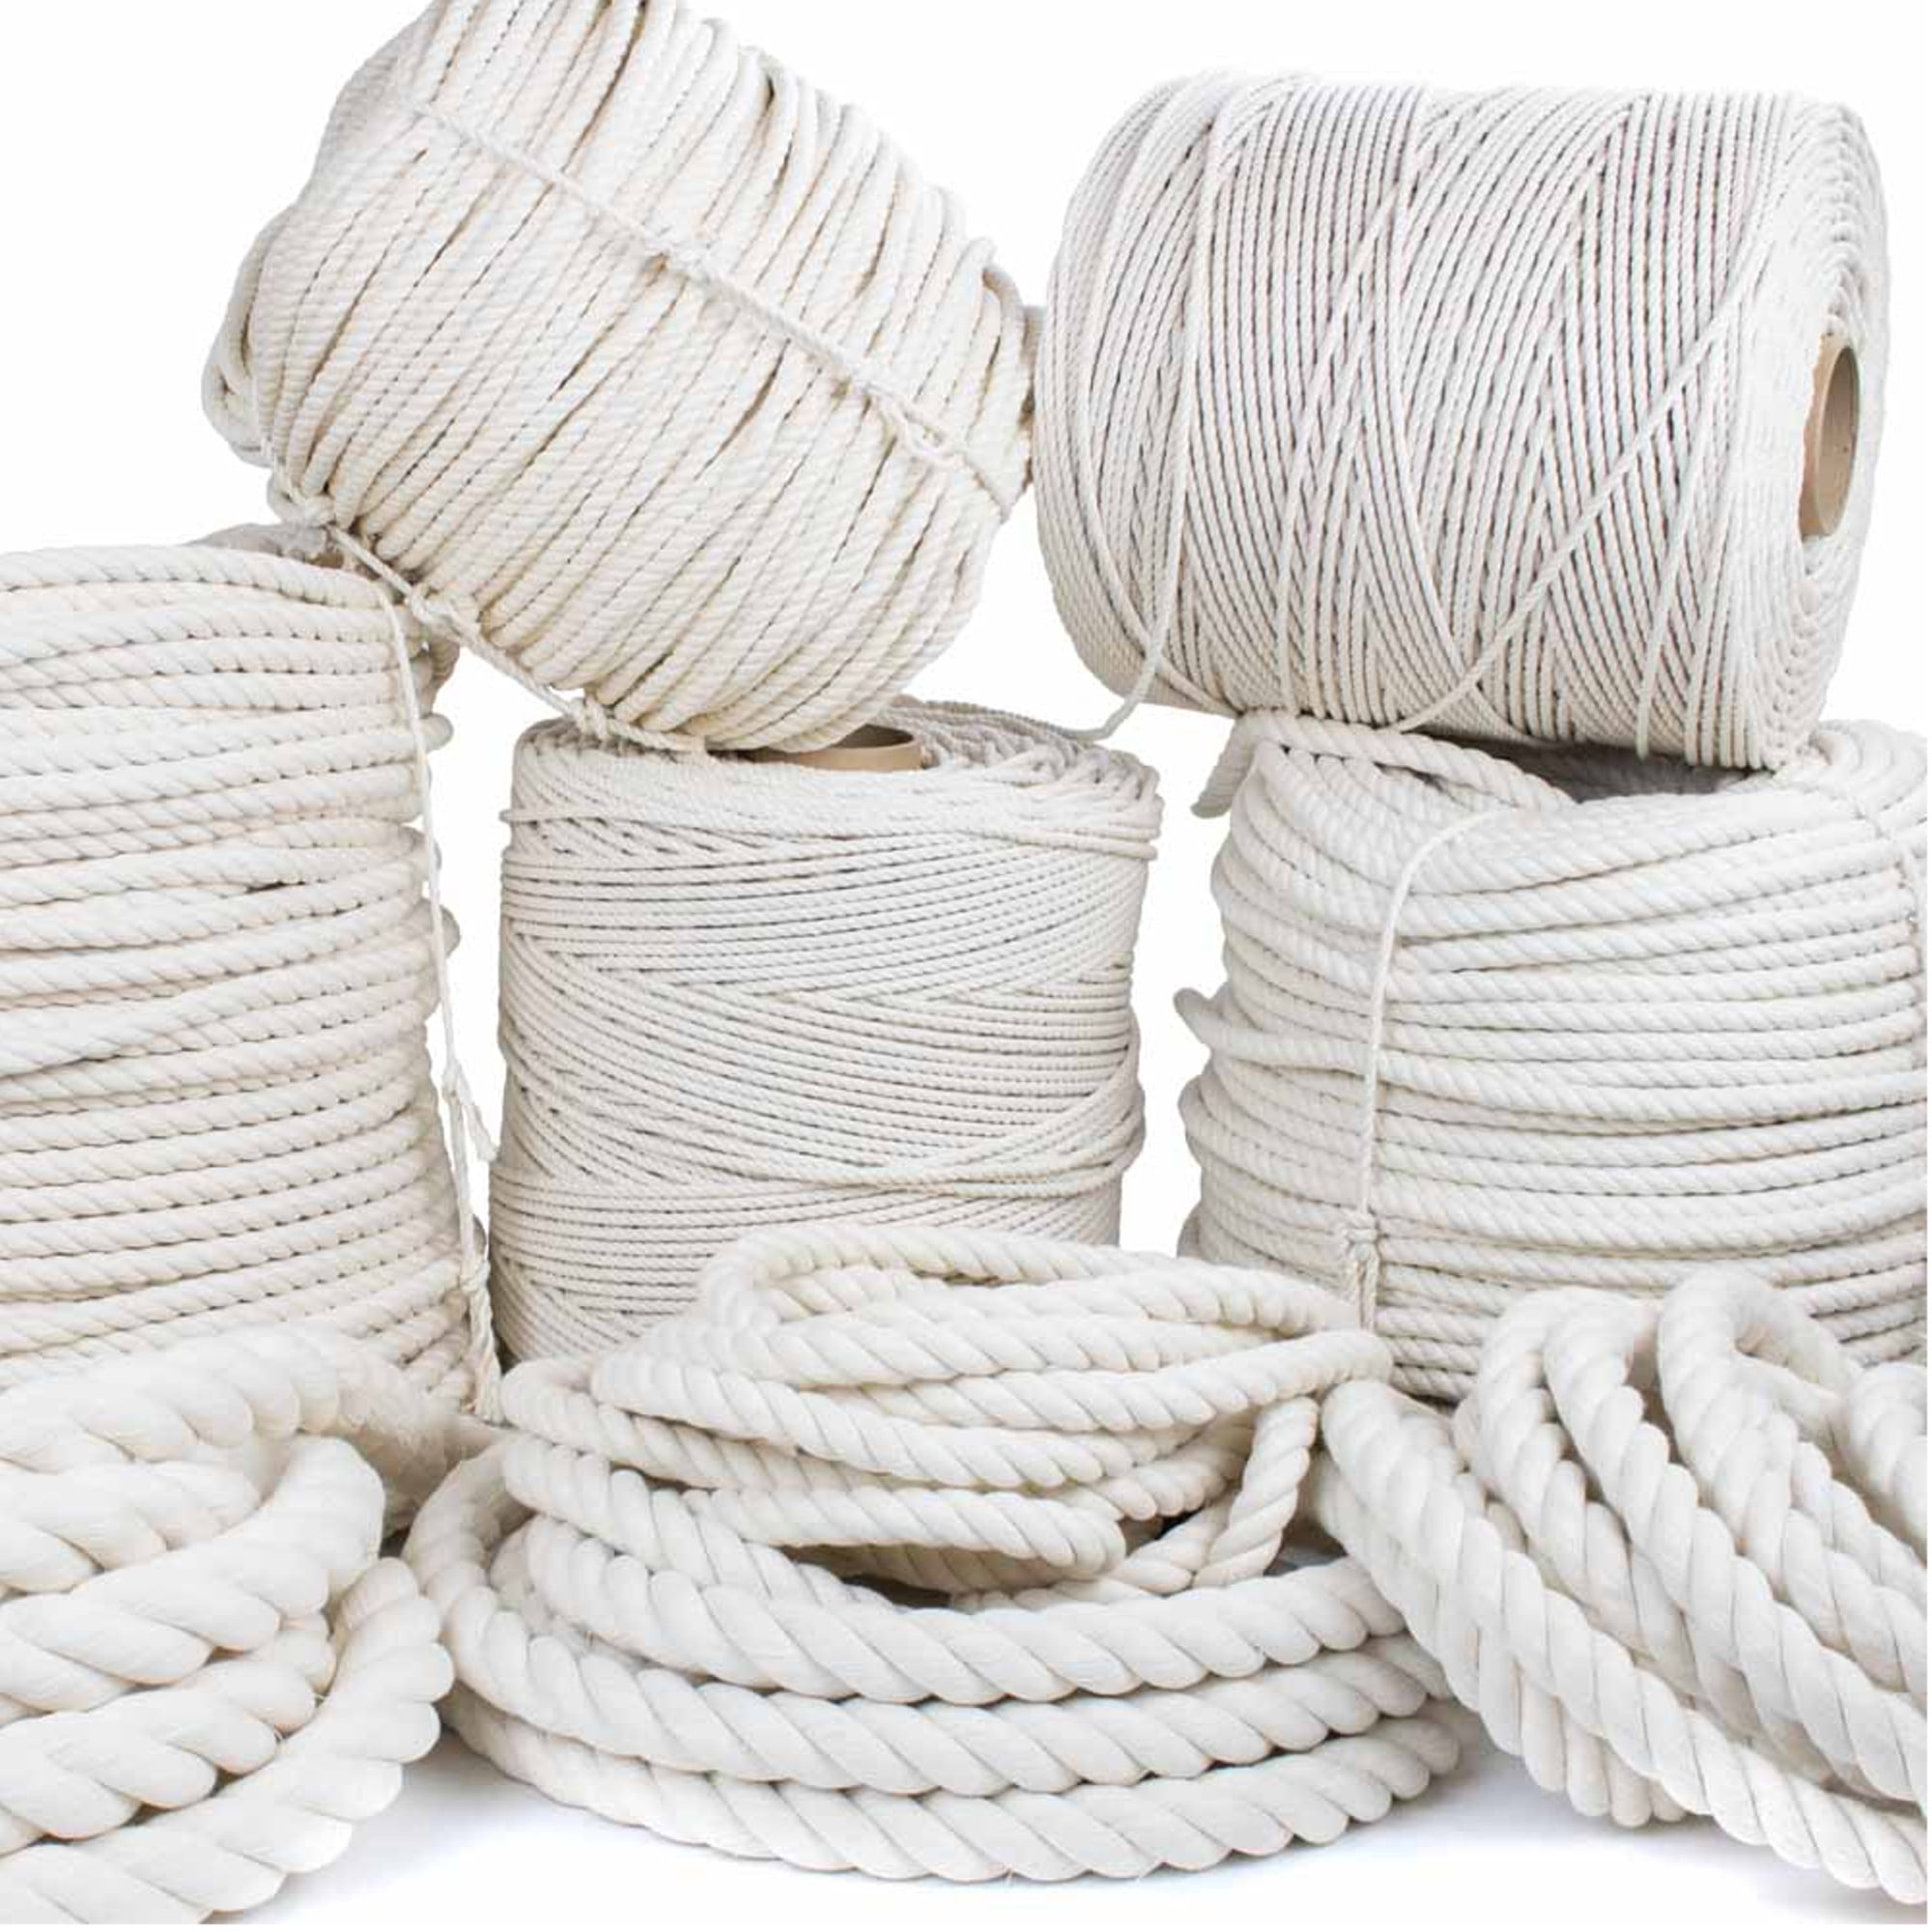 White Twisted Silk Cord Rope 3/8 Inch / 9.5 mm Diameter 1.4 Yards Length